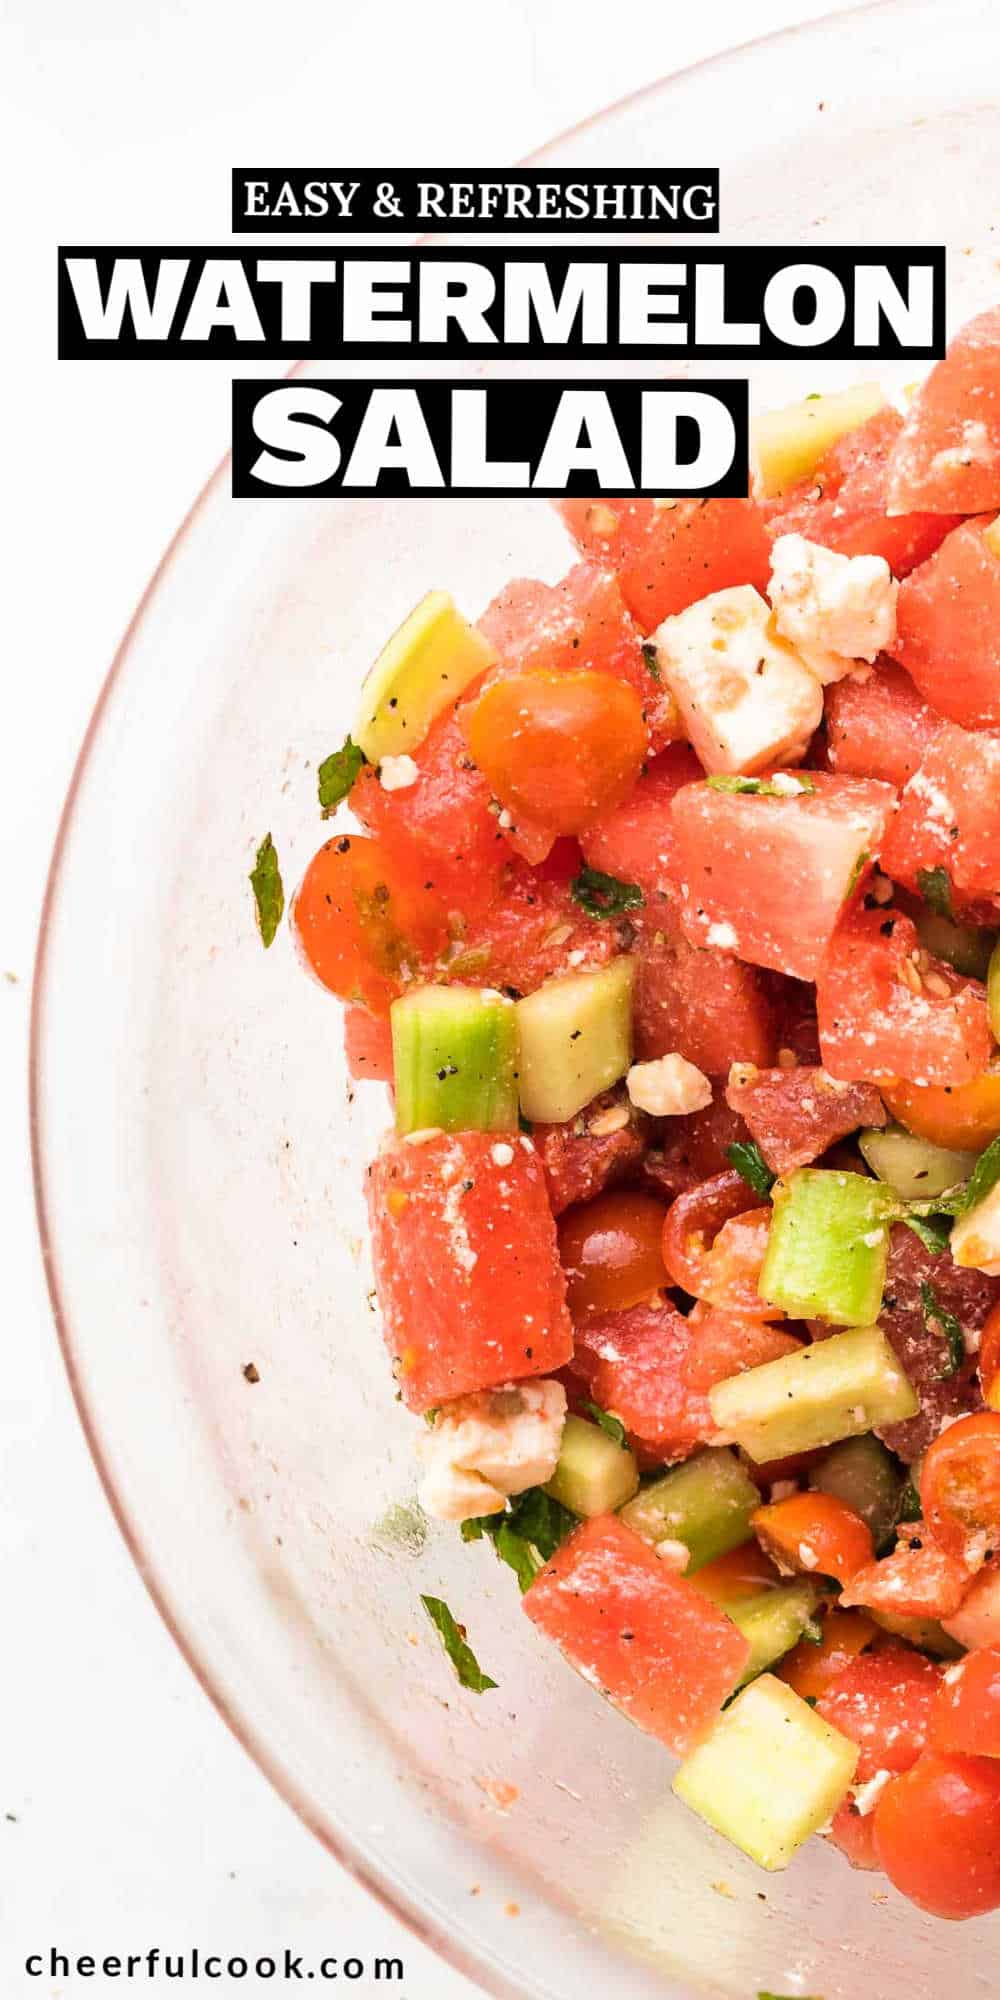 Watermelon Salad is an easy and refreshing summer salad! Made with juicy watermelon, tomatoes, crunchy cucumber, salty feta, and a splash of lemon. Easy Watermelon Salad Recipe #cheerfulcook #watermelon #salad #recipe
 via @cheerfulcook